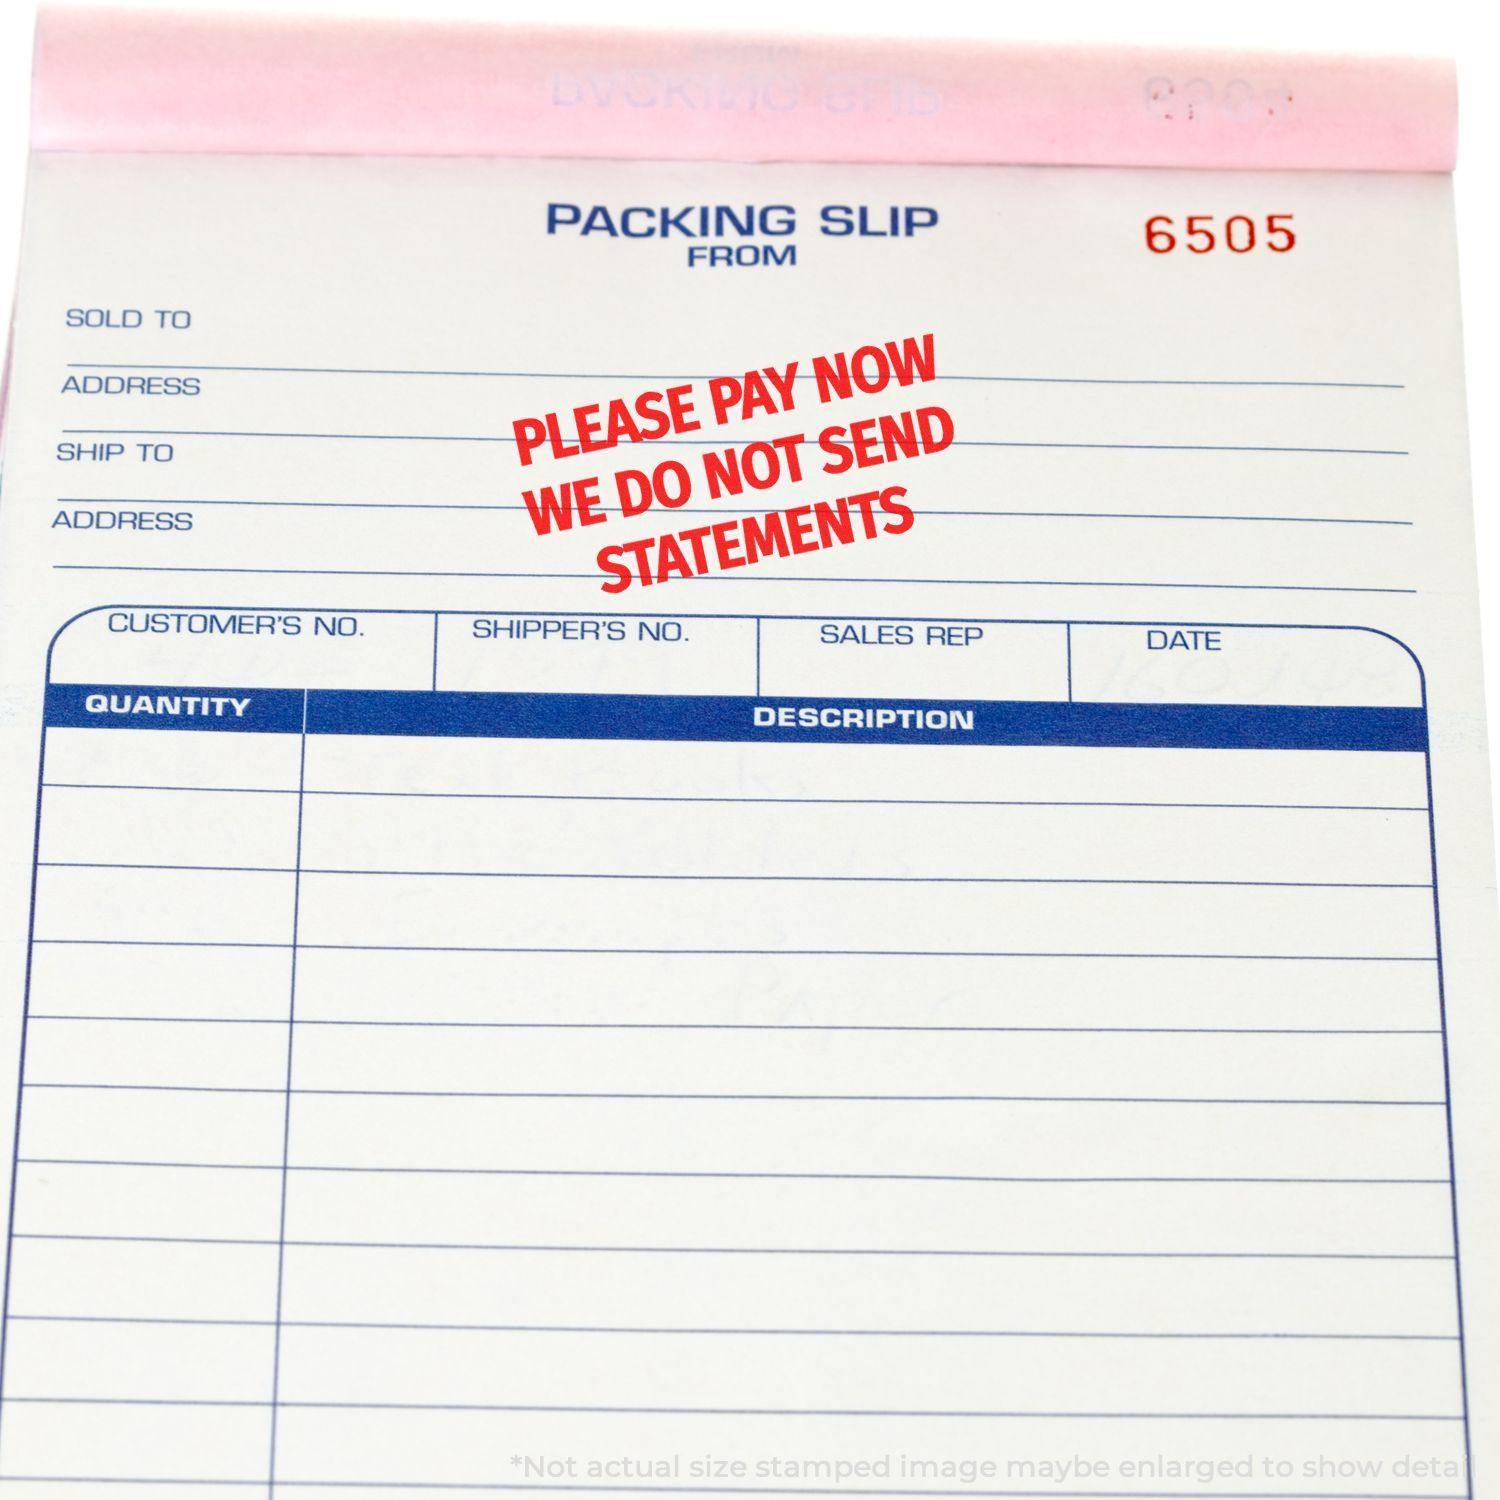 A stock office rubber stamp with a stamped image showing how the text "PLEASE PAY NOW WE DO NOT SEND STATEMENTS" in a large font is displayed after stamping.